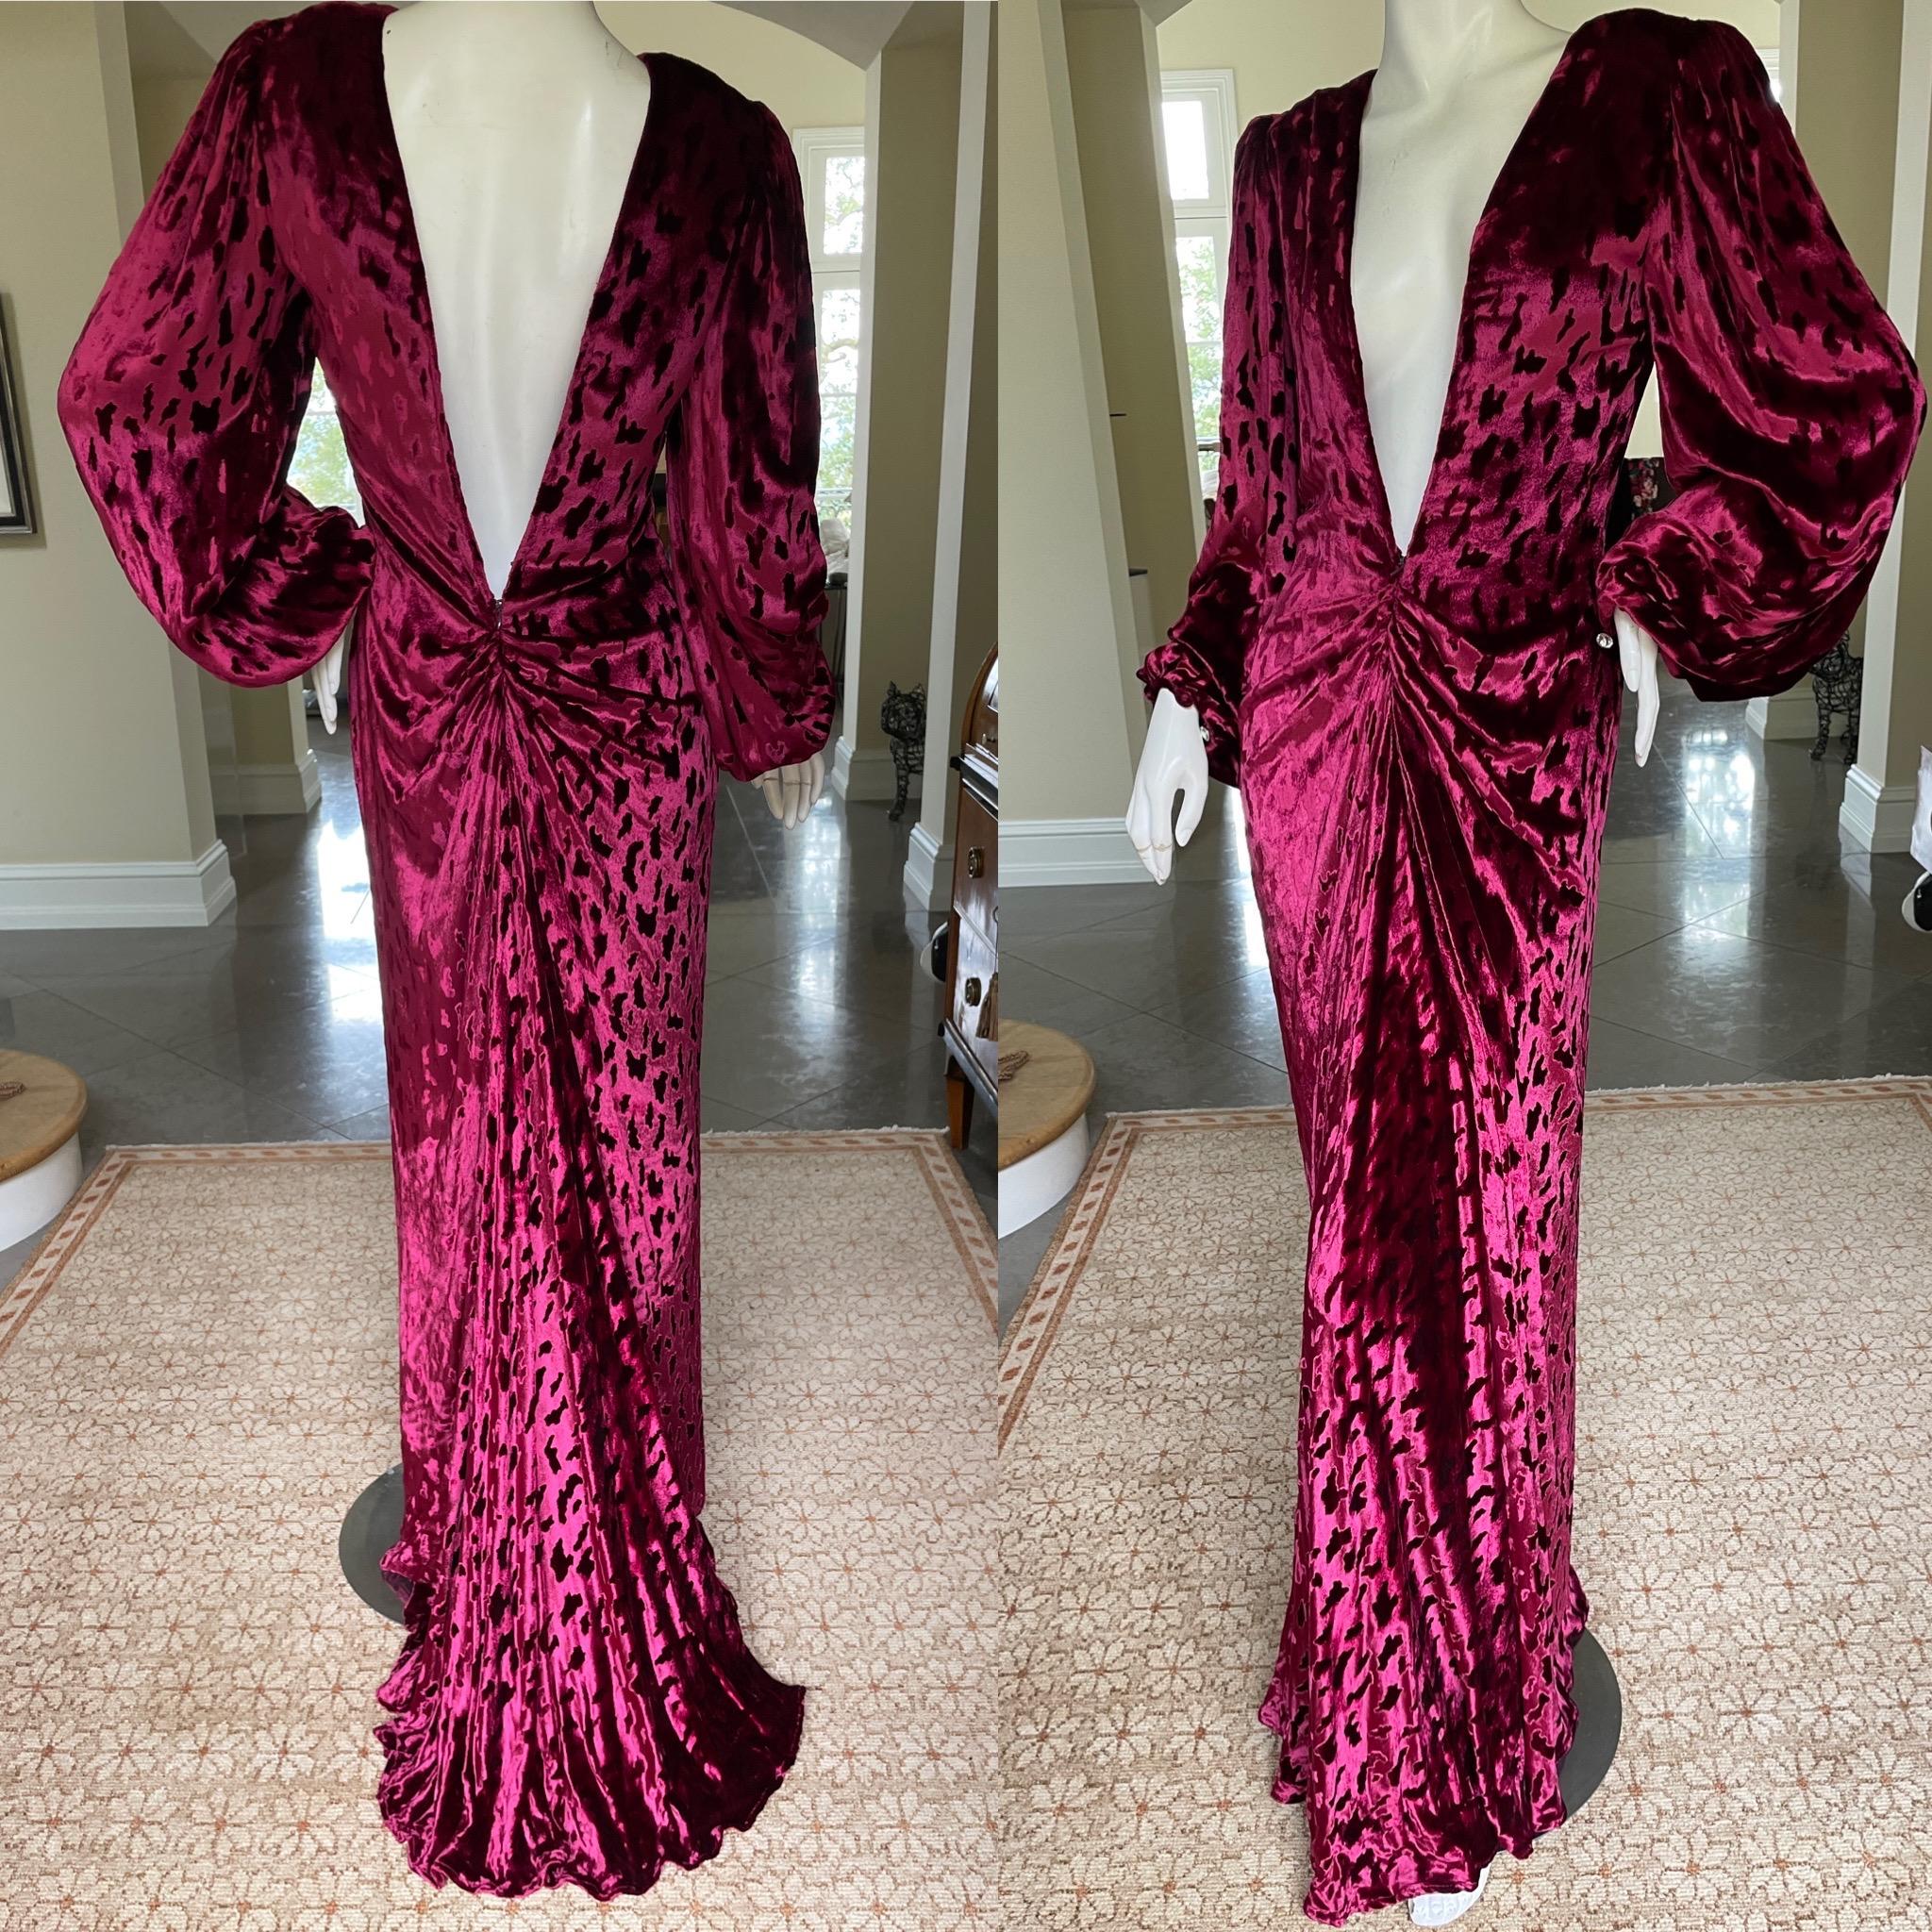 Oscar de la Renta Vintage Red Silk Velvet Mermaid Dress with Fishtail Back.
Luxurious leopard spot red velvet with plunging back. I also show it turned around, it looks amazing with the plunge in front. Cut on the bias, there is a lot of stretch.
 